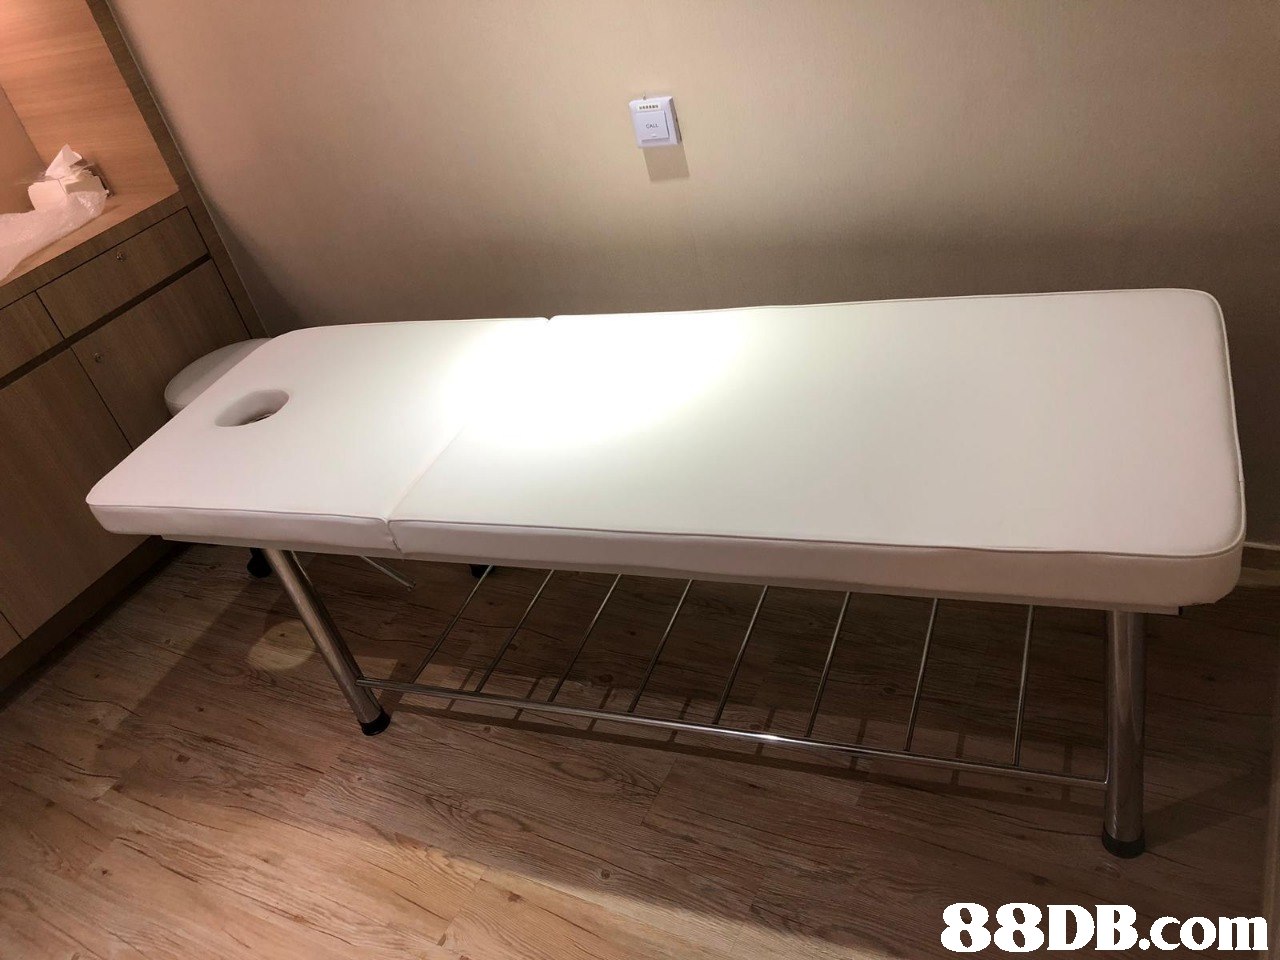   Massage table,Furniture,Table,Room,Bench